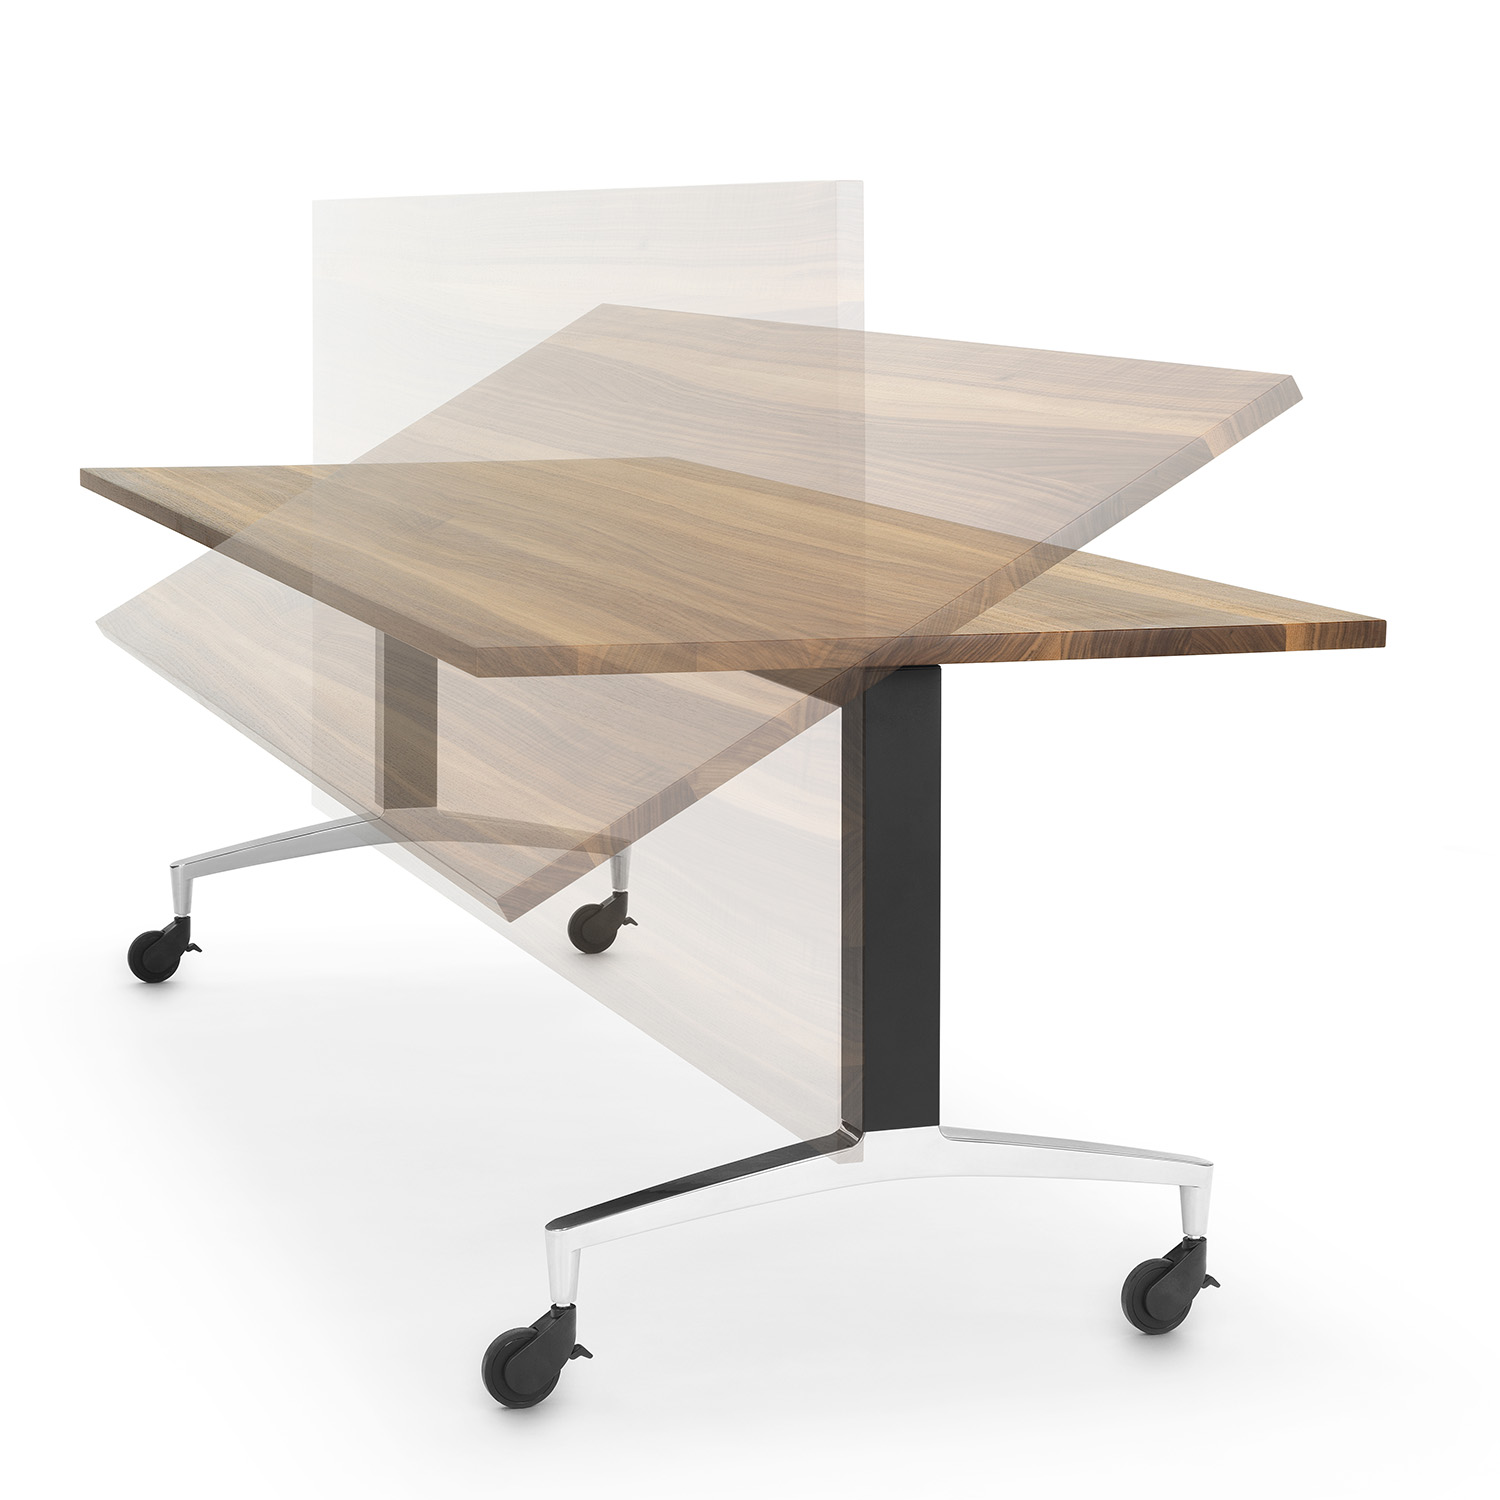 Folding table top in motion